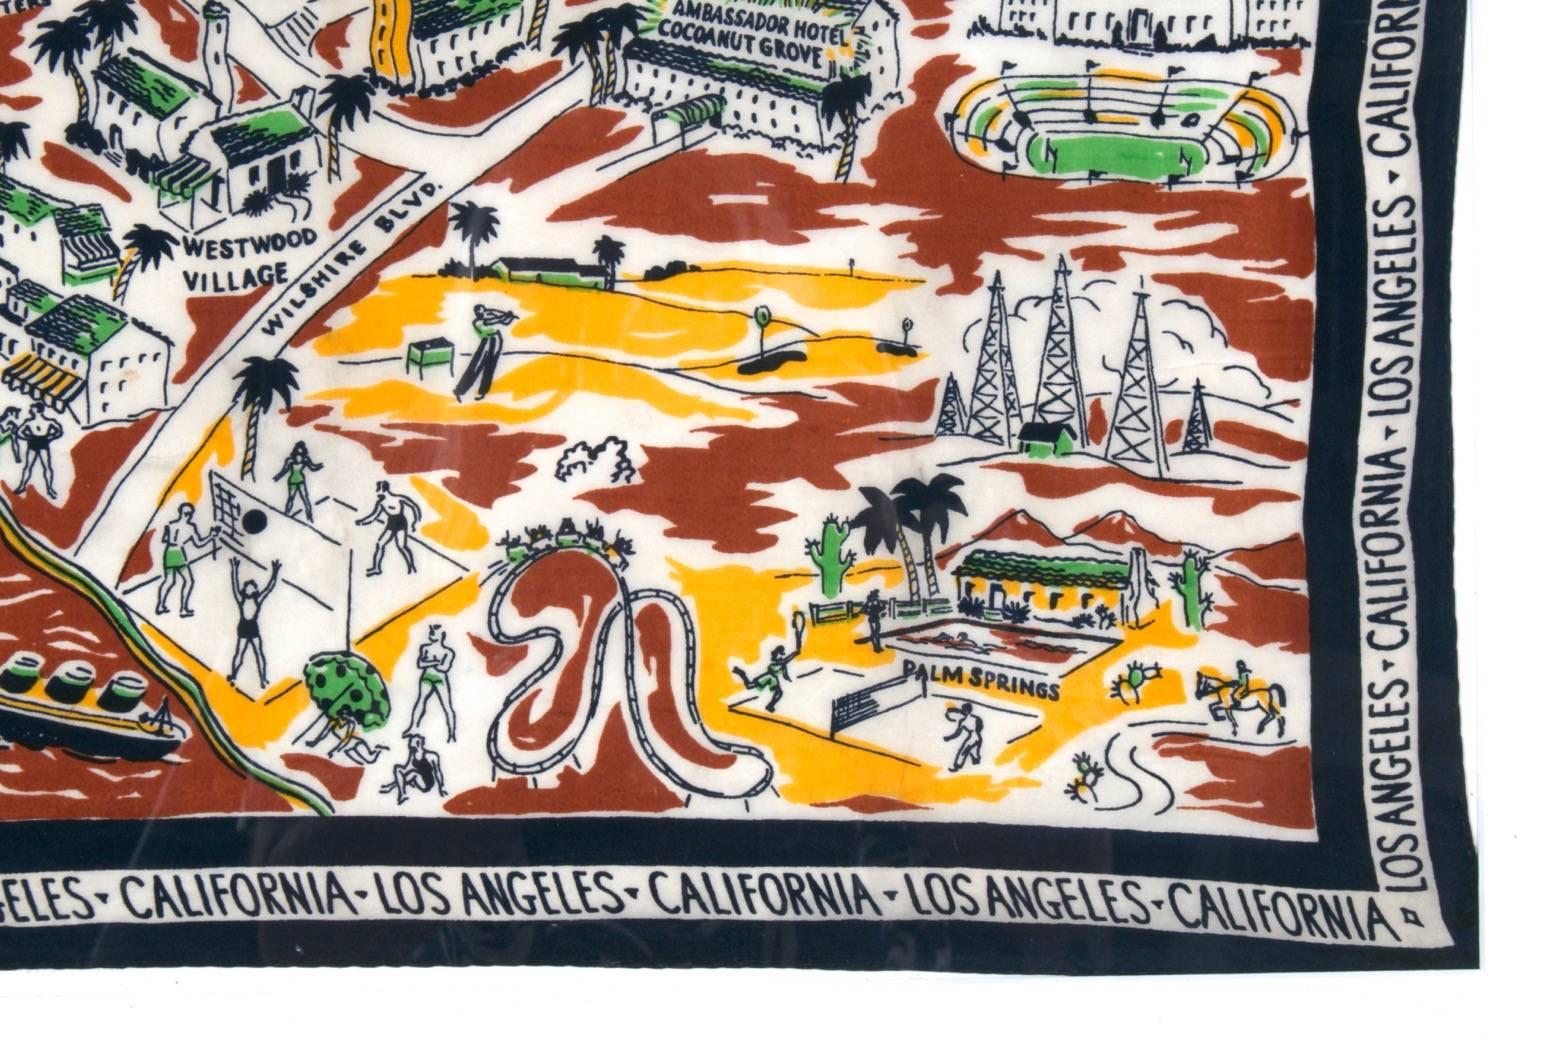 Los Angeles Area, Southern California Pictorial Tourist Scarf, circa 1930s 4